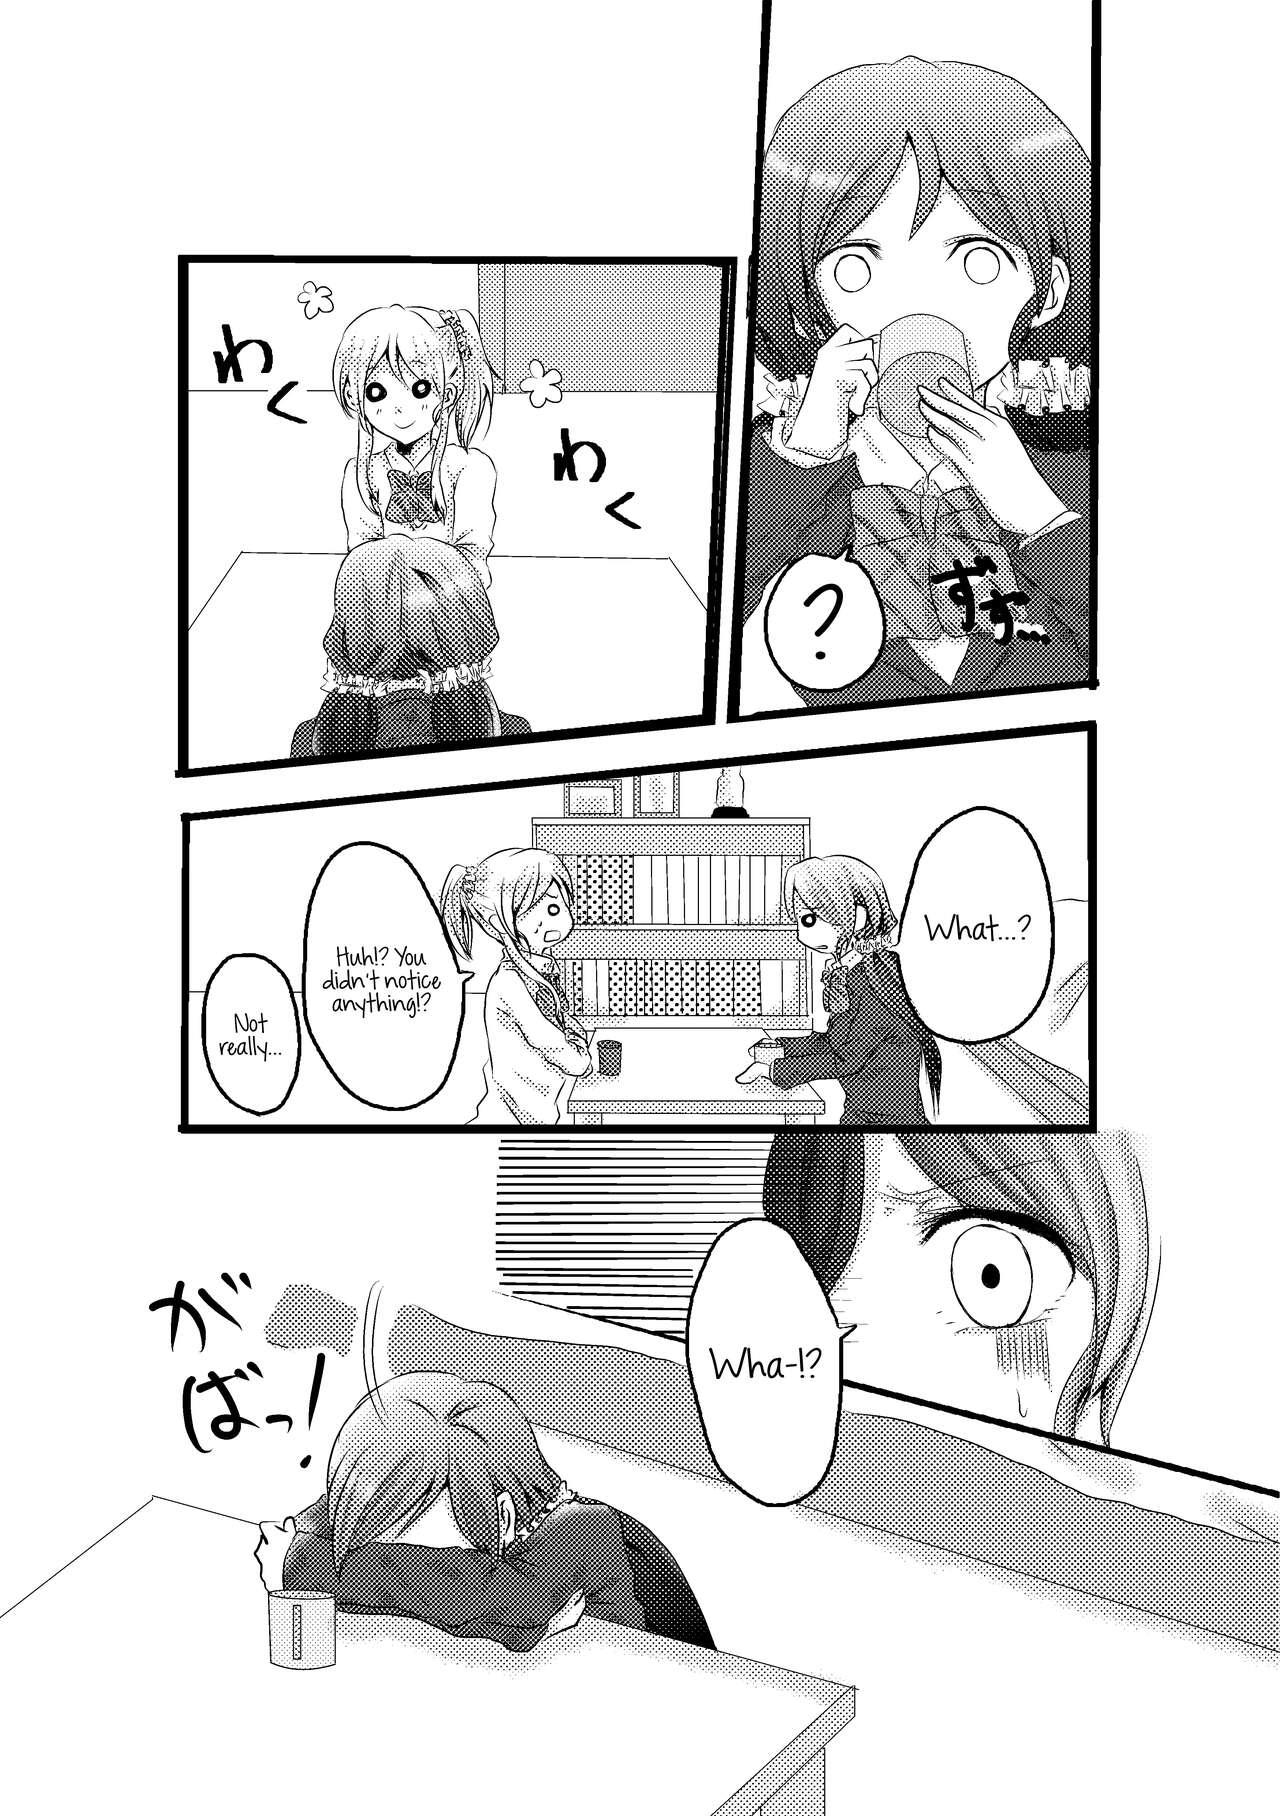 Transsexual [Inugoya (Toshiko)] A story about mischievous Eli-chan and Nozomi-chan (Umi no Shinwa) (Love Live!) [English] [Usr32] [Digital] - Love live Money - Page 2